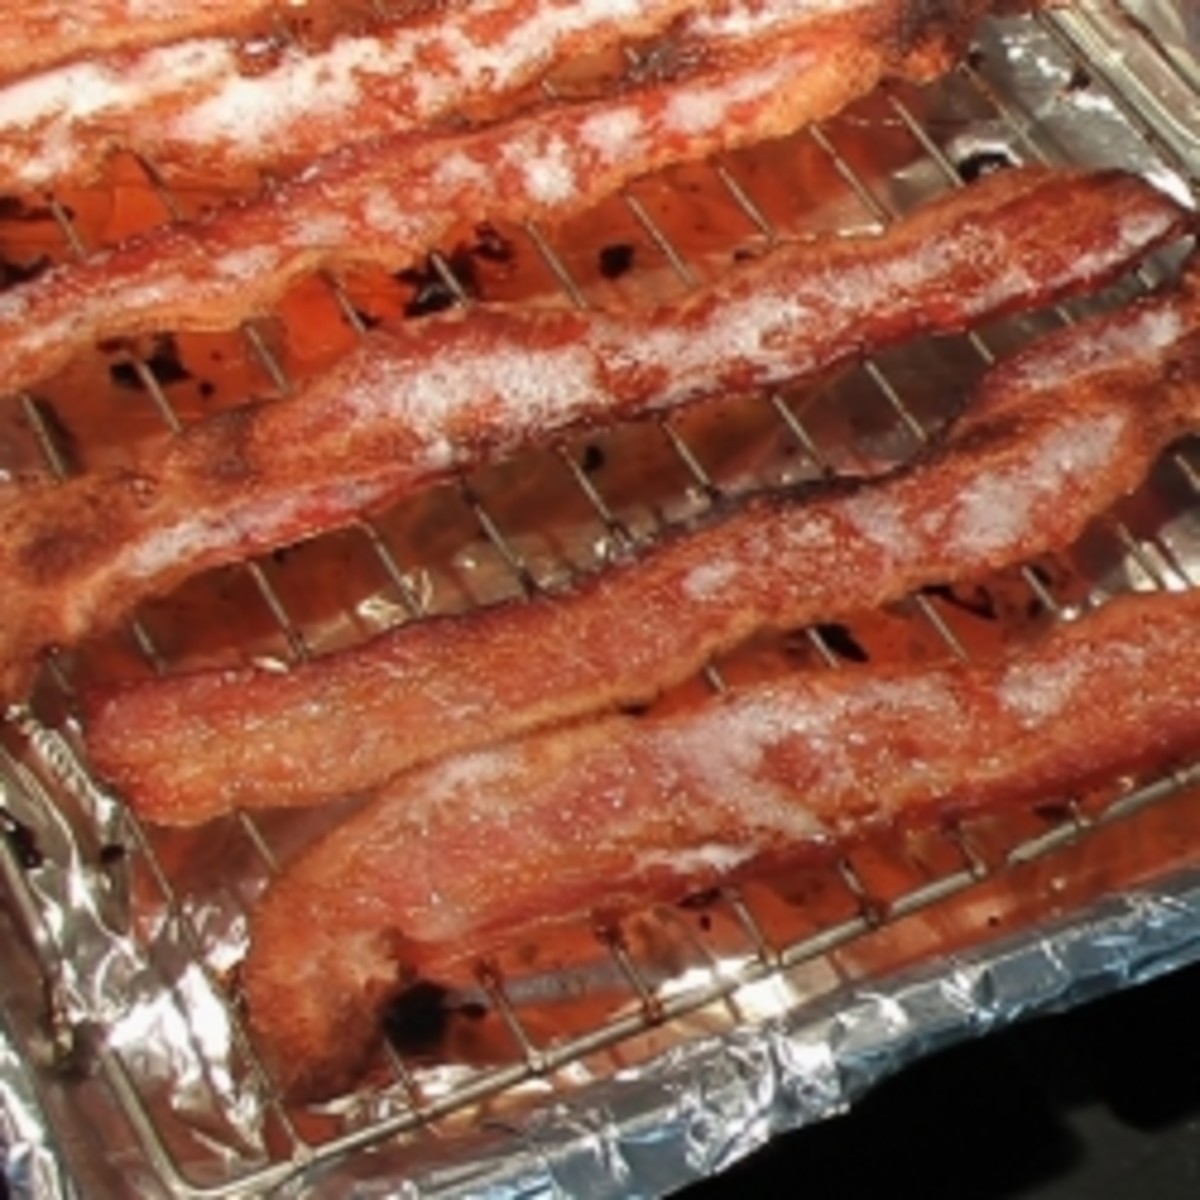 The Best Way to Cook a Pound of Bacon